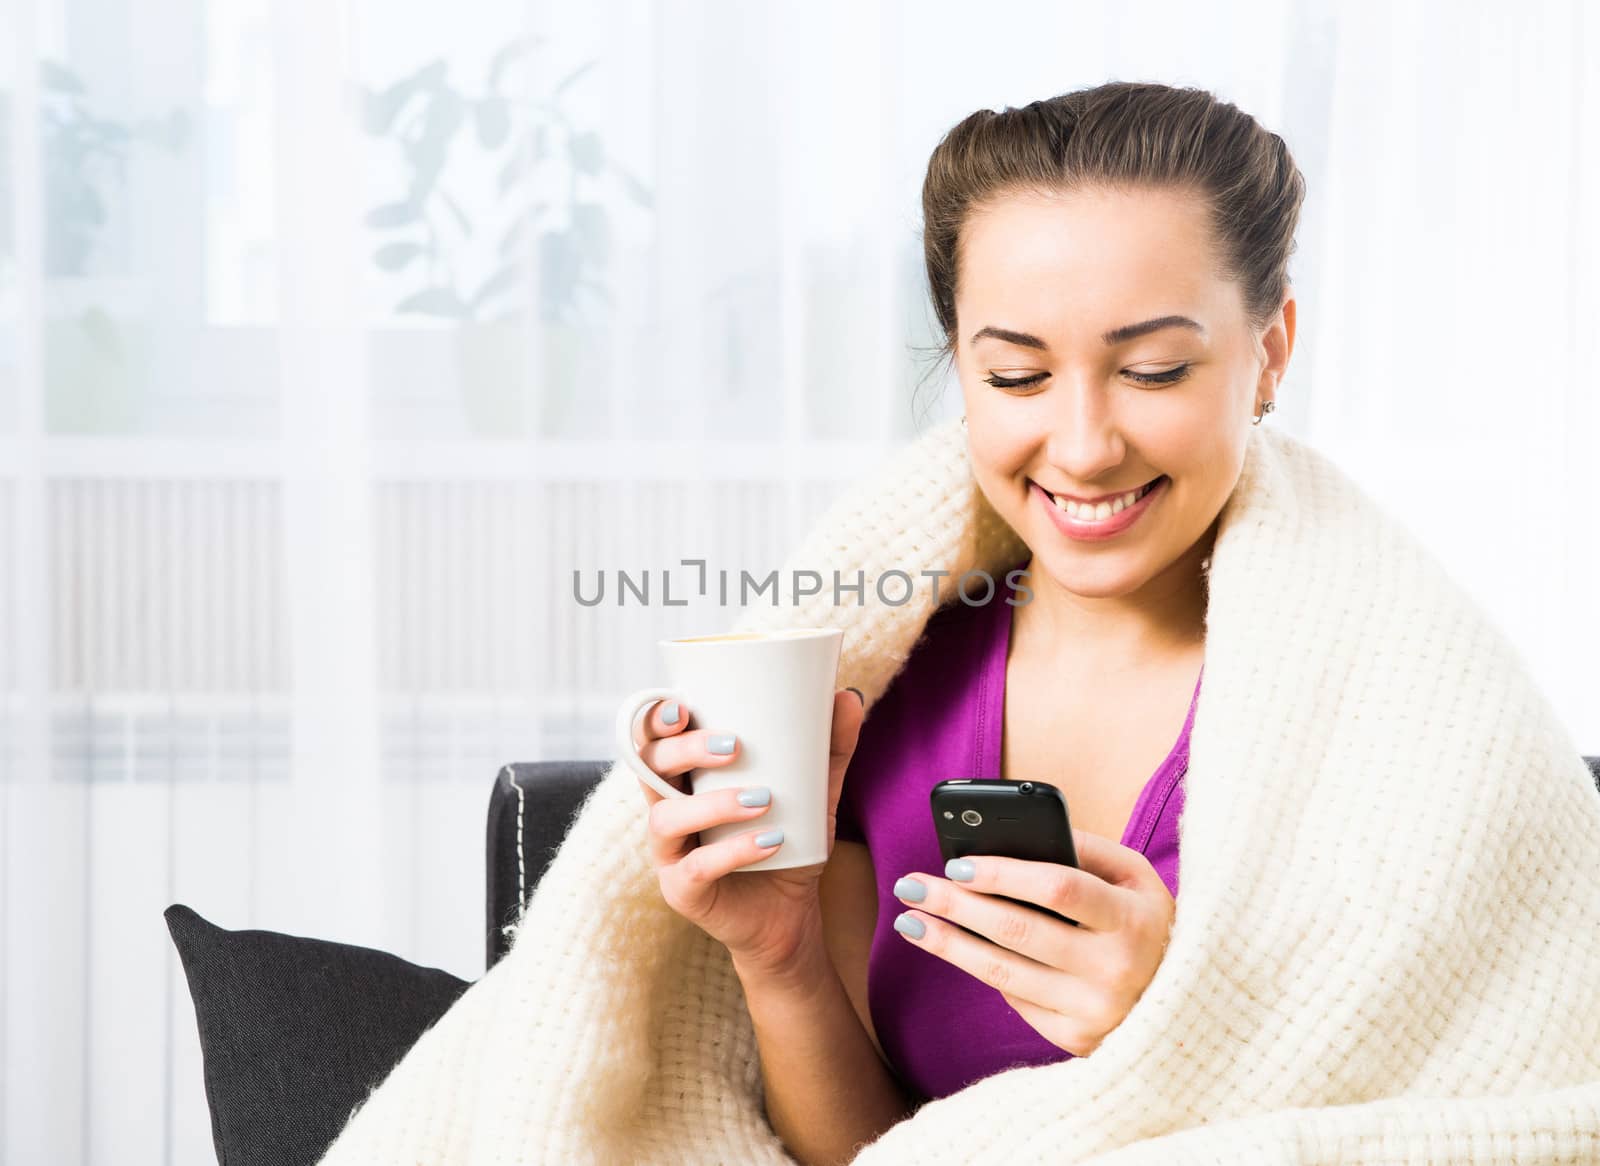 Attractive young woman using her cell phone to send a text message